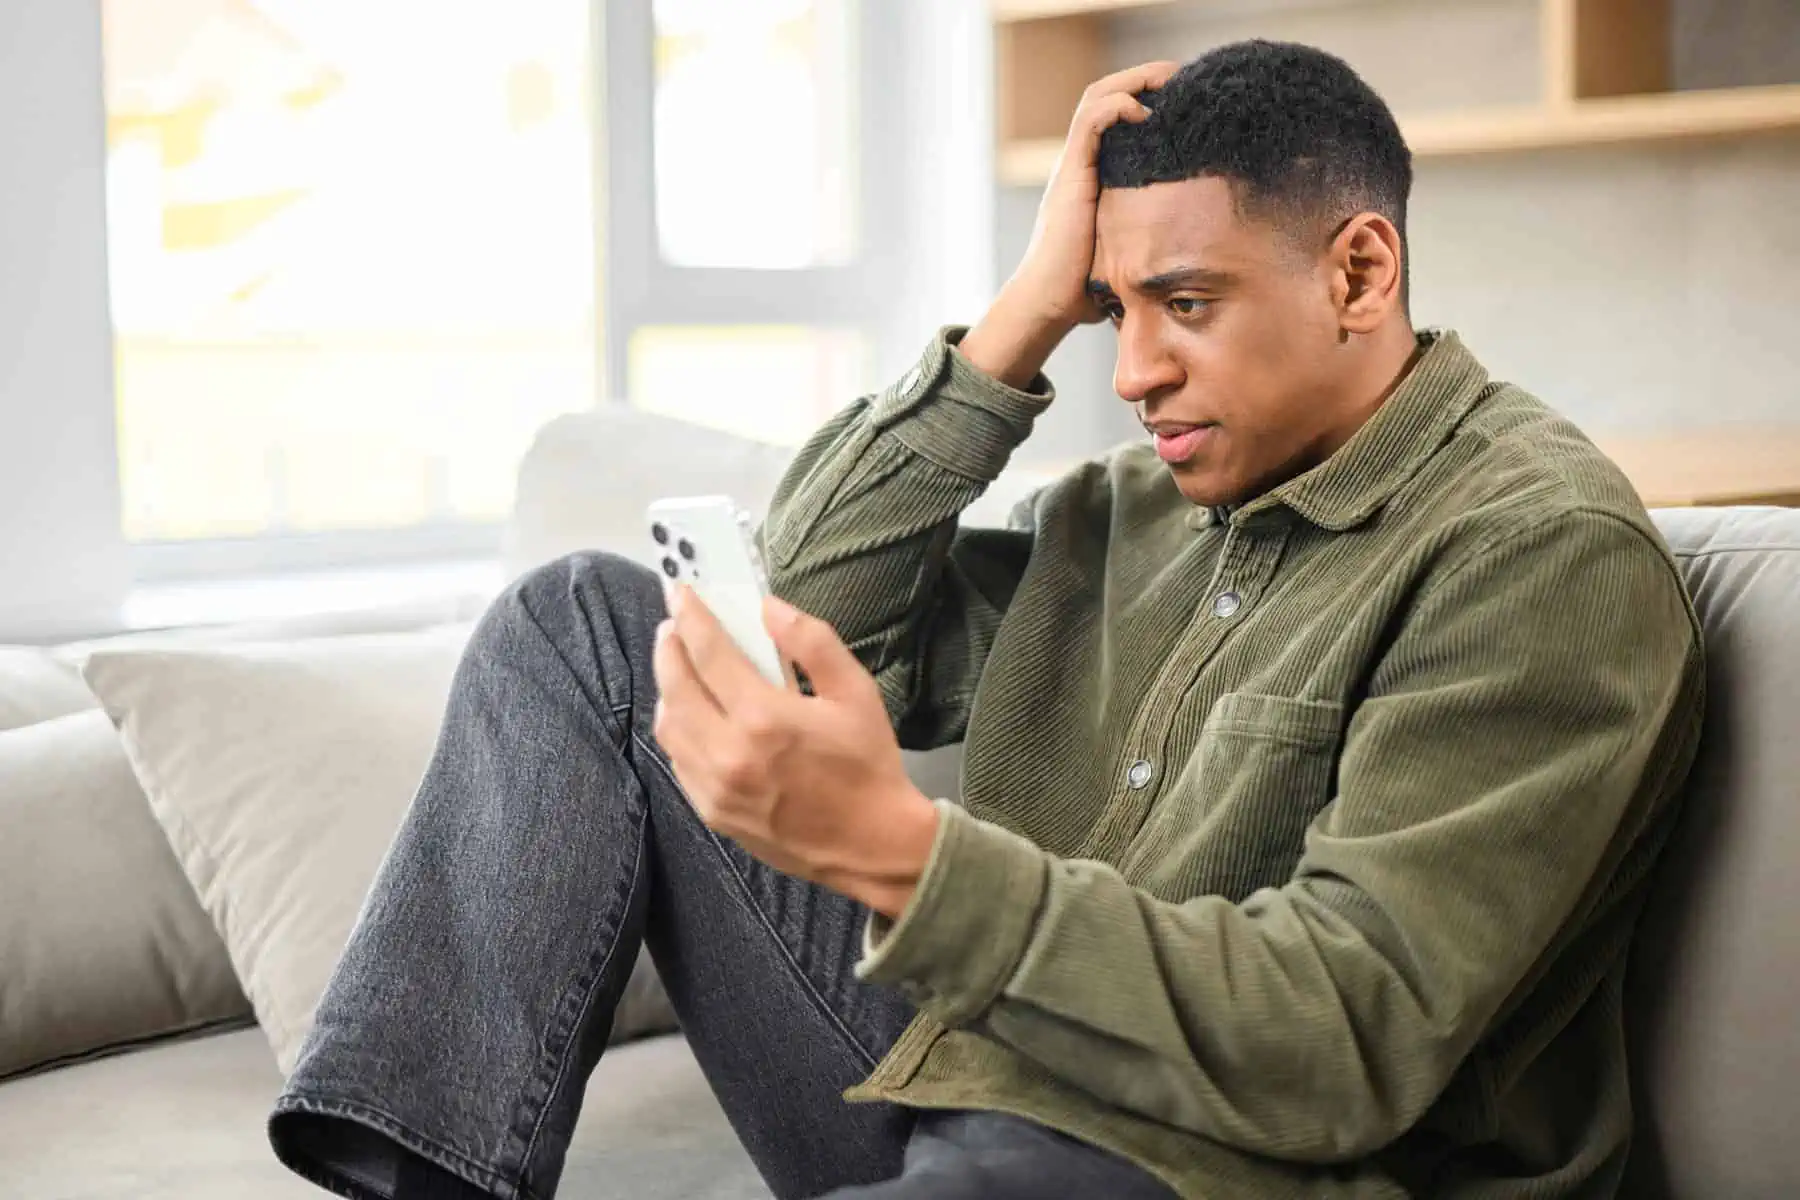 A man sitting on a couch looking at a cell phone